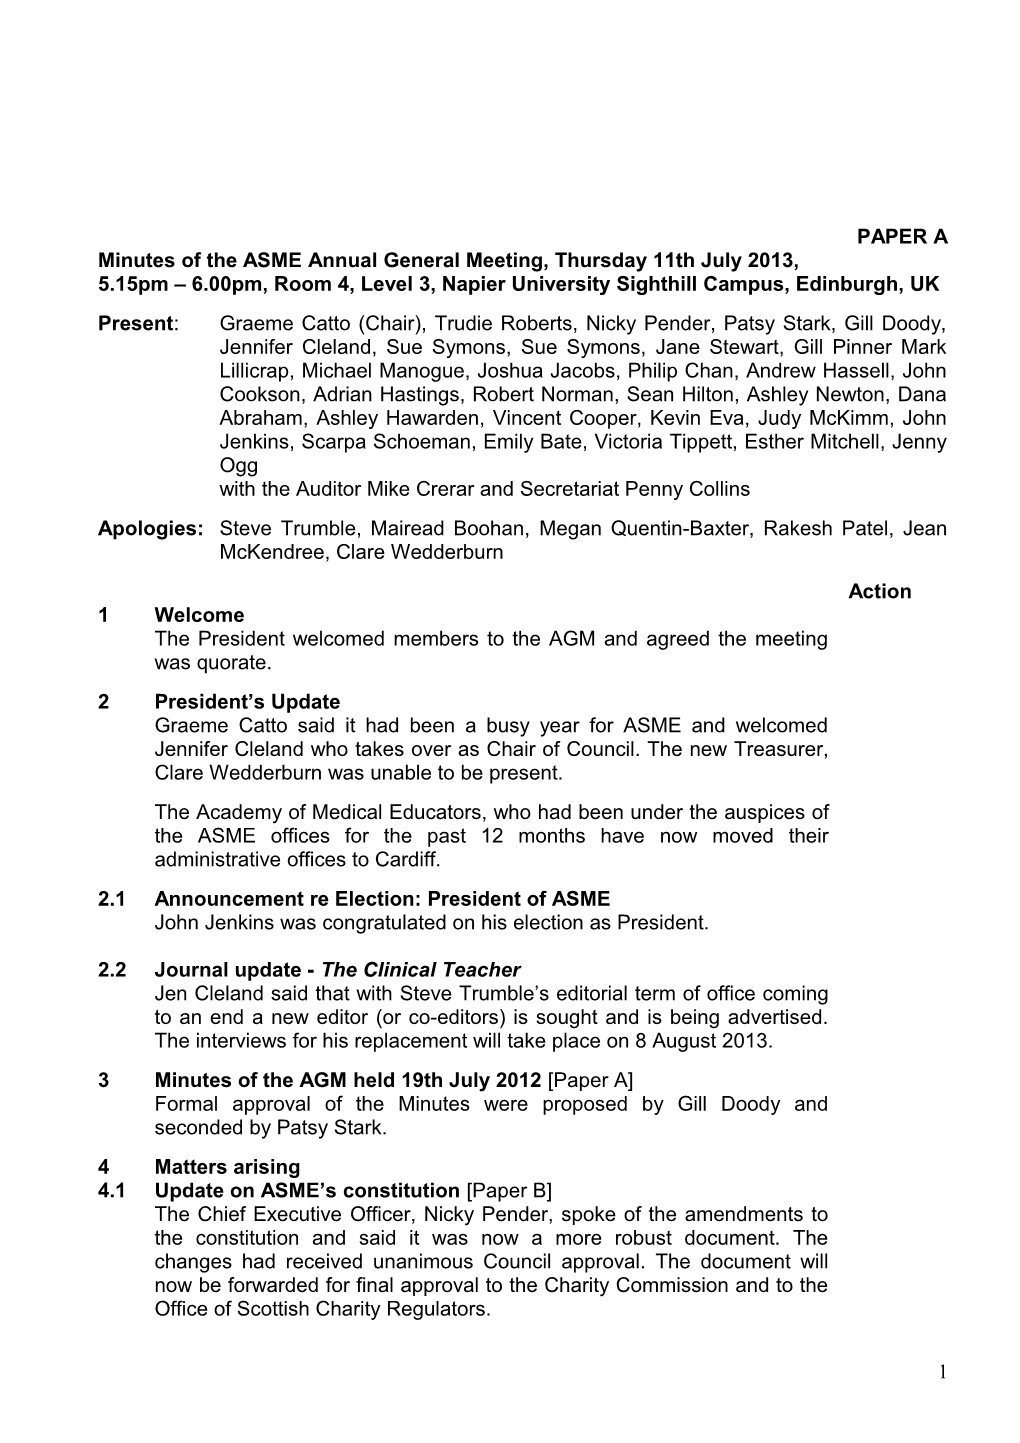 Minutes of the ASME Annual General Meeting, Thursday 19Th July 2012, 5Pm 5